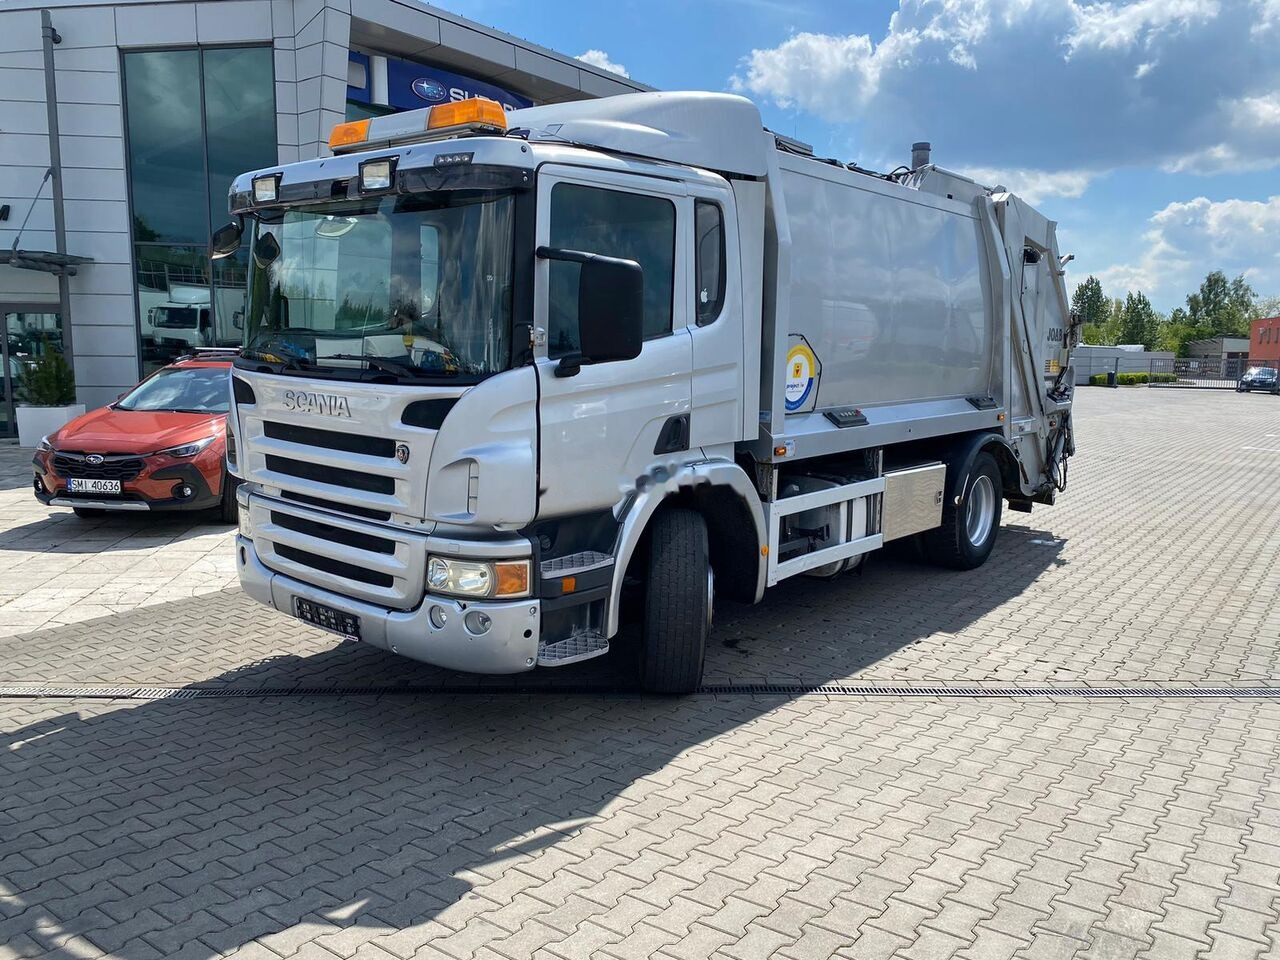 Scania P230DB / JOAB ANACONDA TWIN 13.3m3 / 1 OWNER / FULL SERVICED leasing Scania P230DB / JOAB ANACONDA TWIN 13.3m3 / 1 OWNER / FULL SERVICED: picture 1